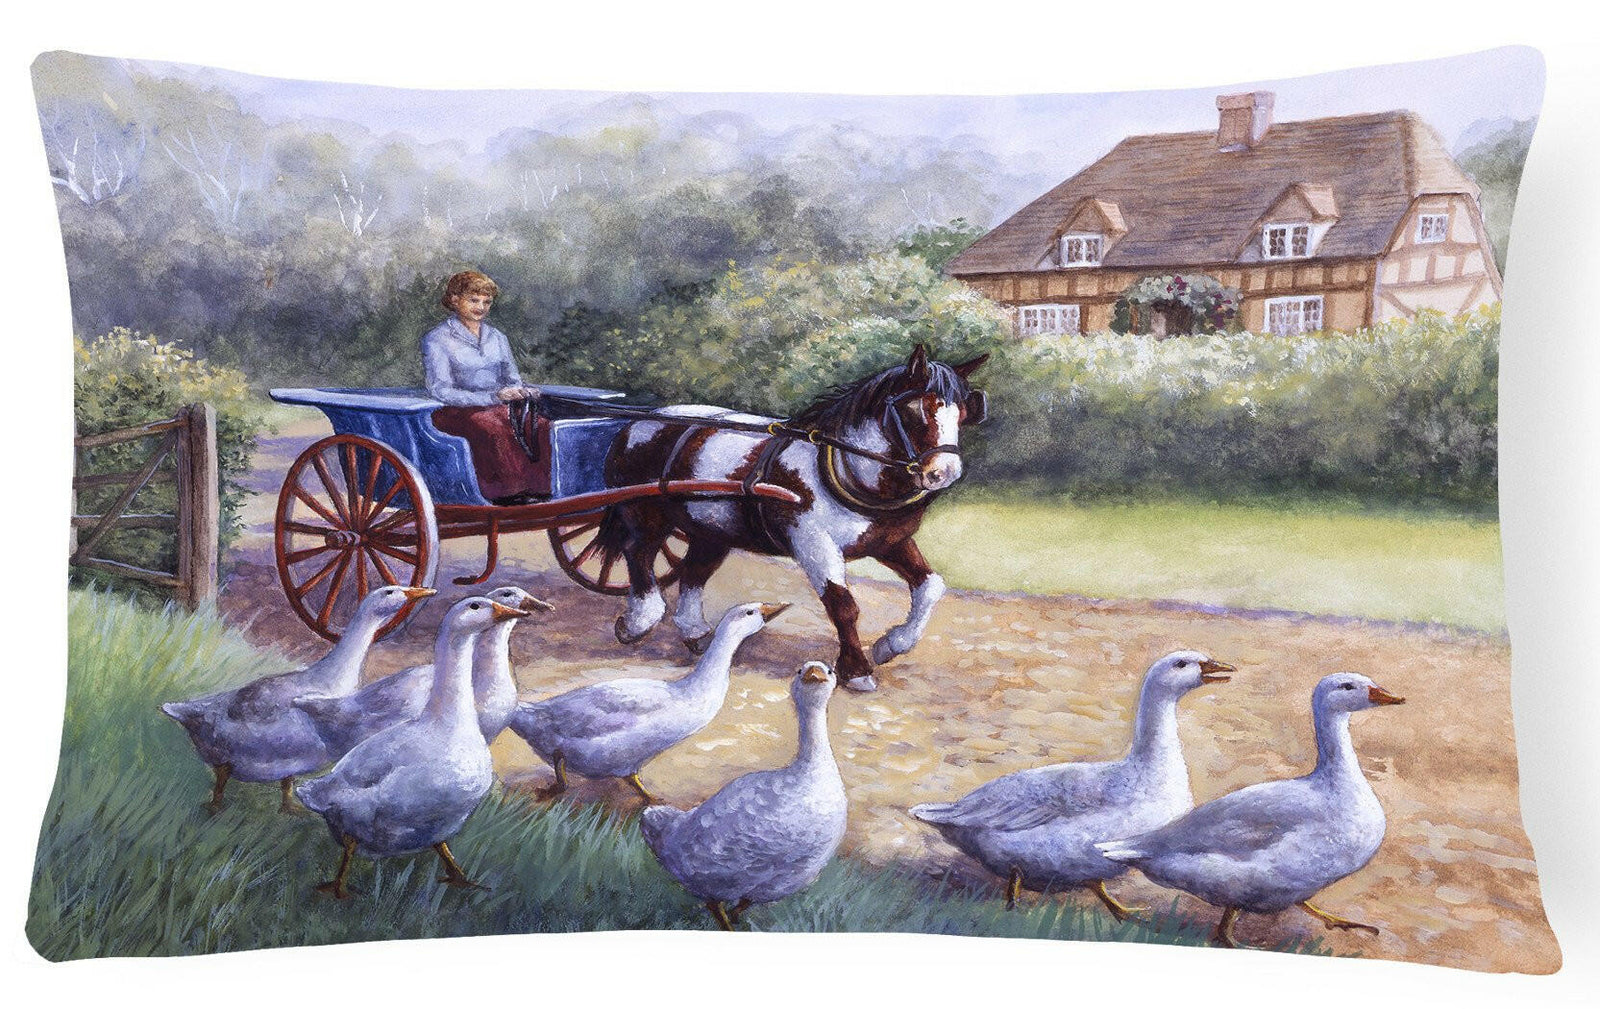 Geese Crossing before the Horse Fabric Decorative Pillow BDBA0351PW1216 by Caroline's Treasures